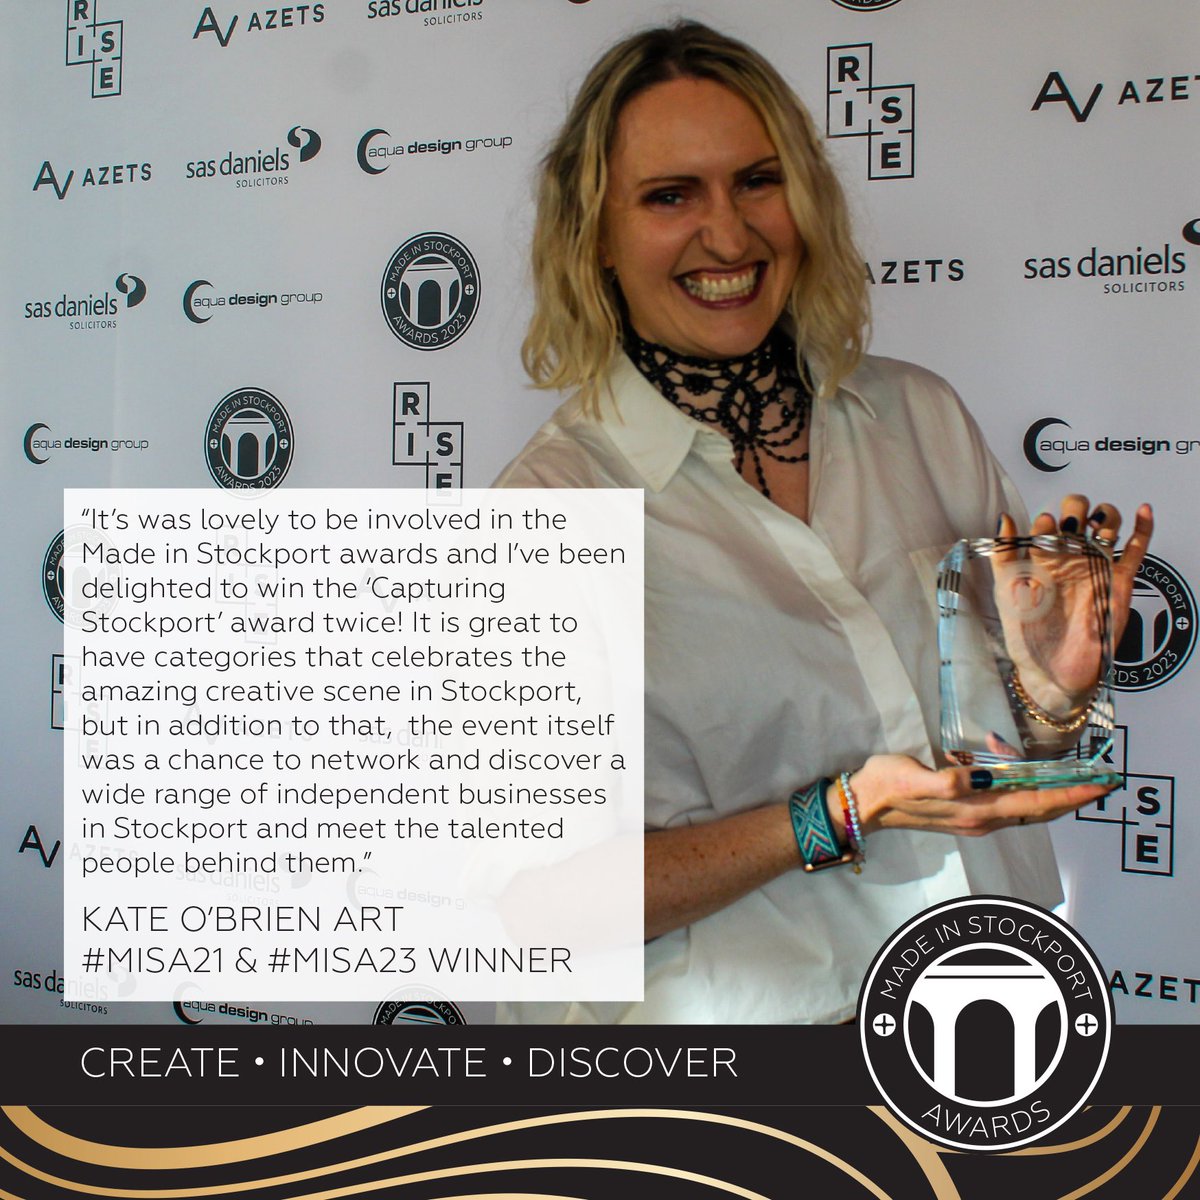 Want to know what past winners think about #MadeInStockport Awards? This is what @KateOBrienArt has said 😊 #BusinessAwards #Stockport